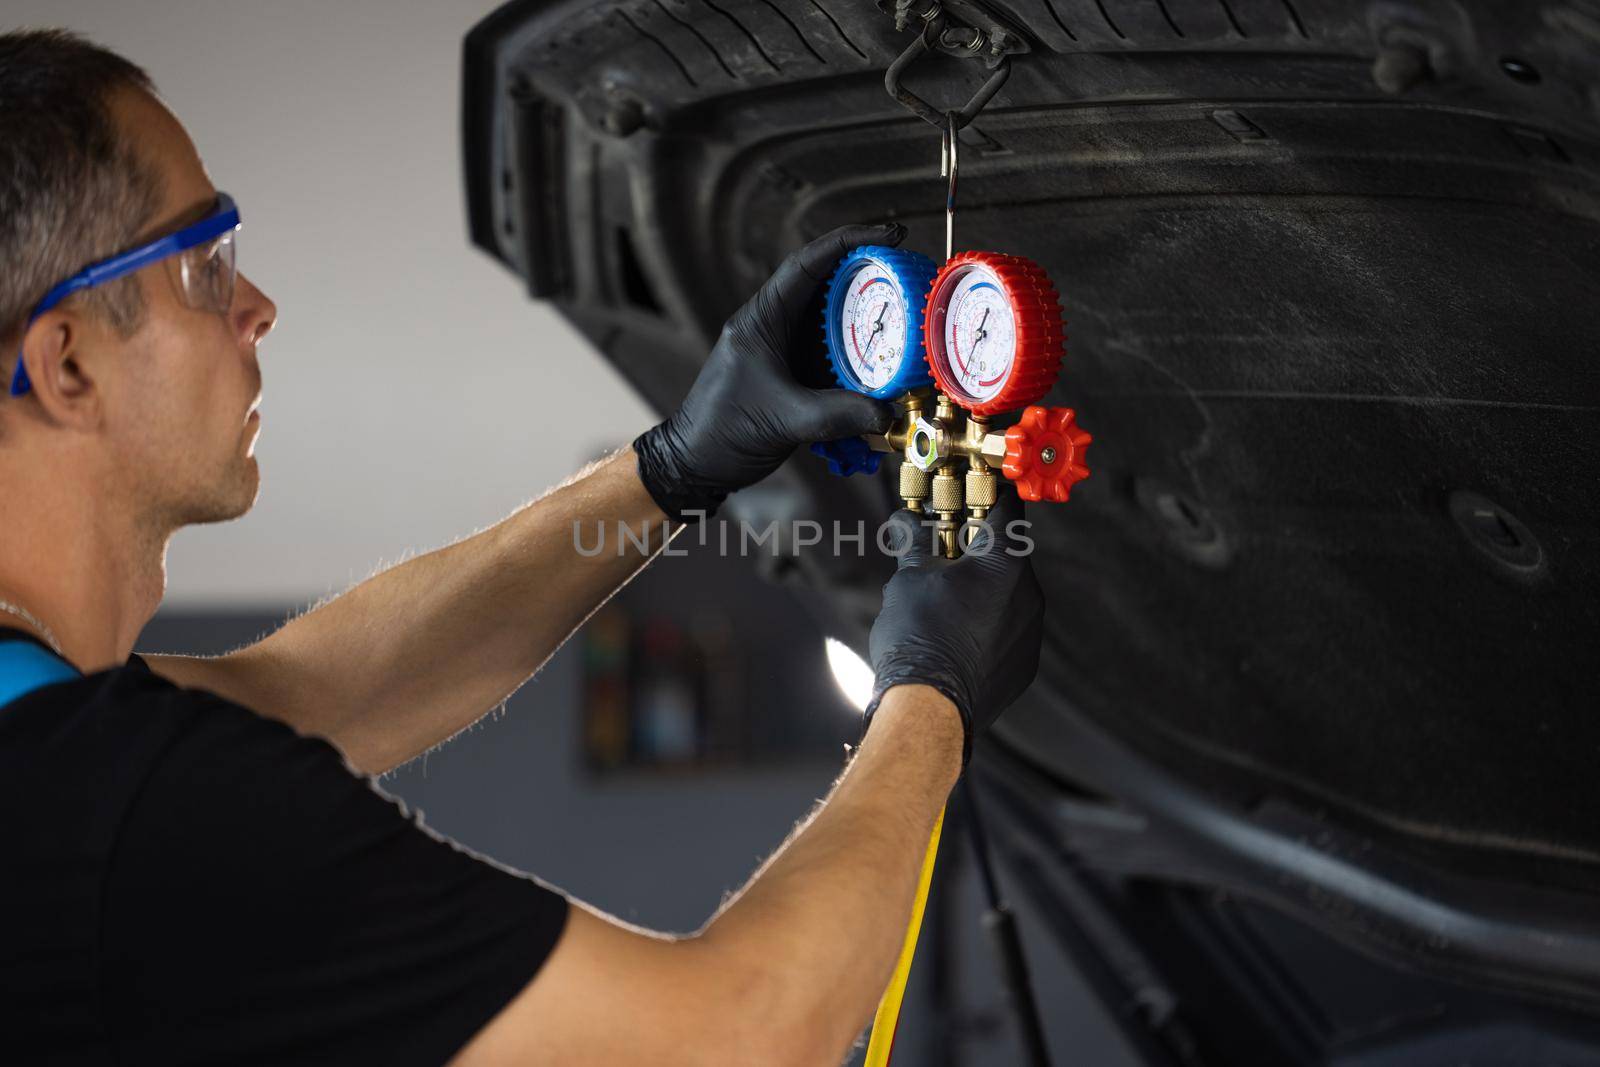 Car mechanic with manometer to fill the gas in the car air conditioning compressor. Service of checking the car air conditioner. Refrigerant recharge system by uflypro